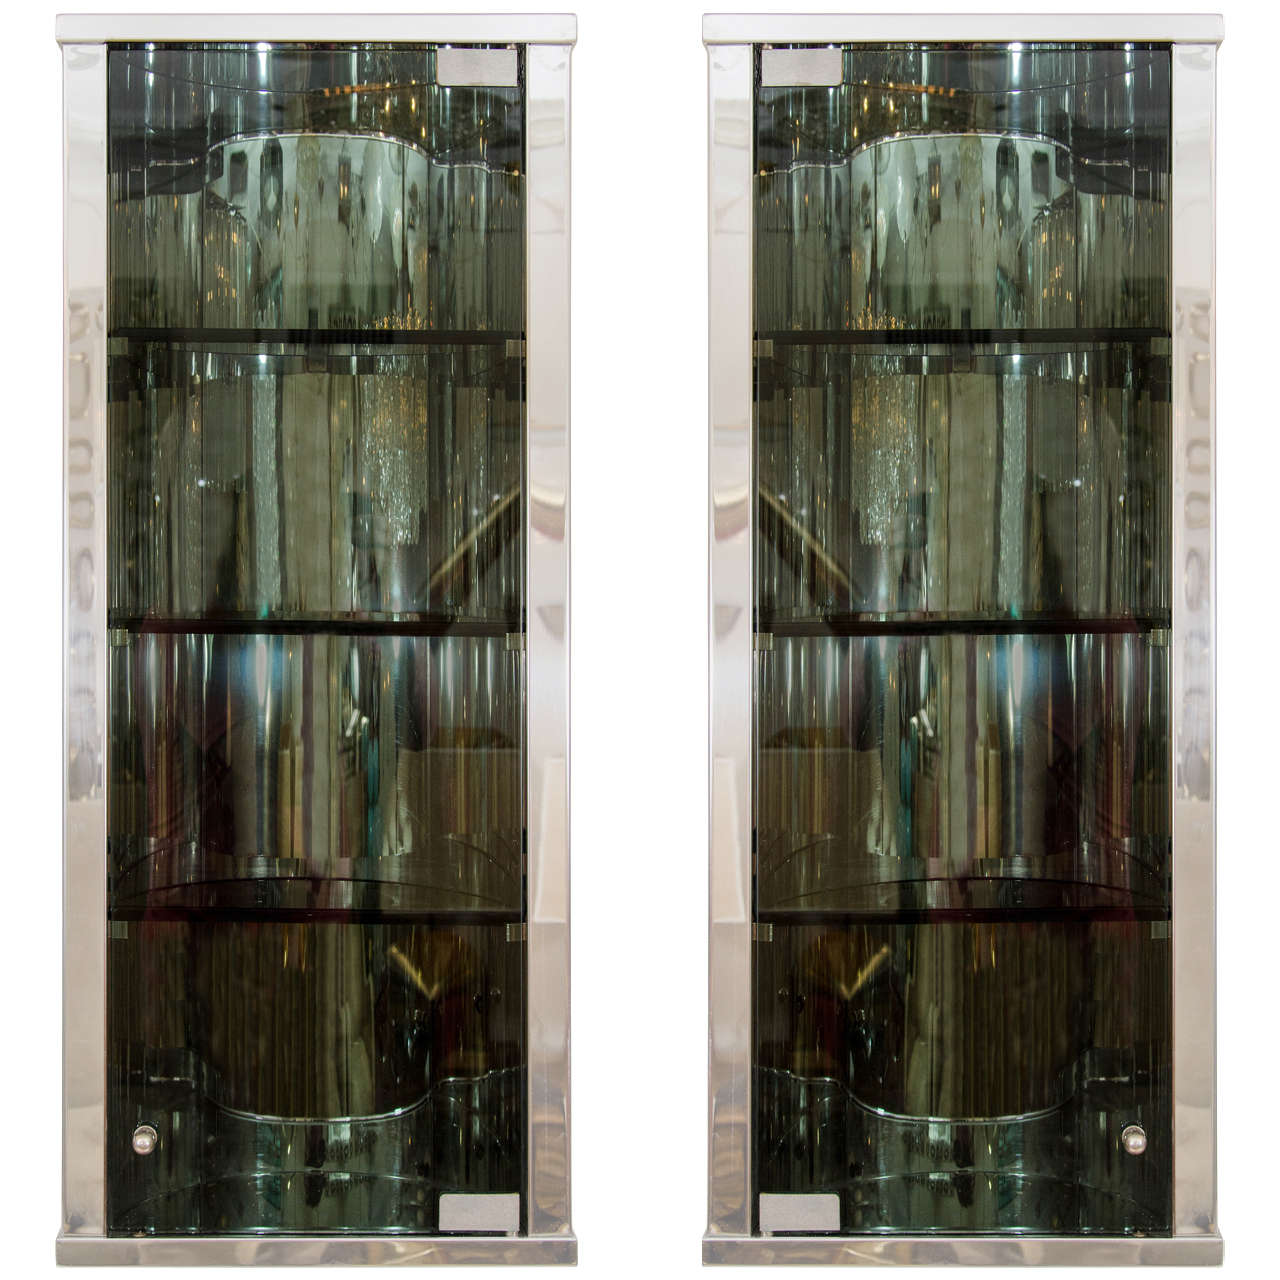 Pair of Stainless Steel Wall Cabinets